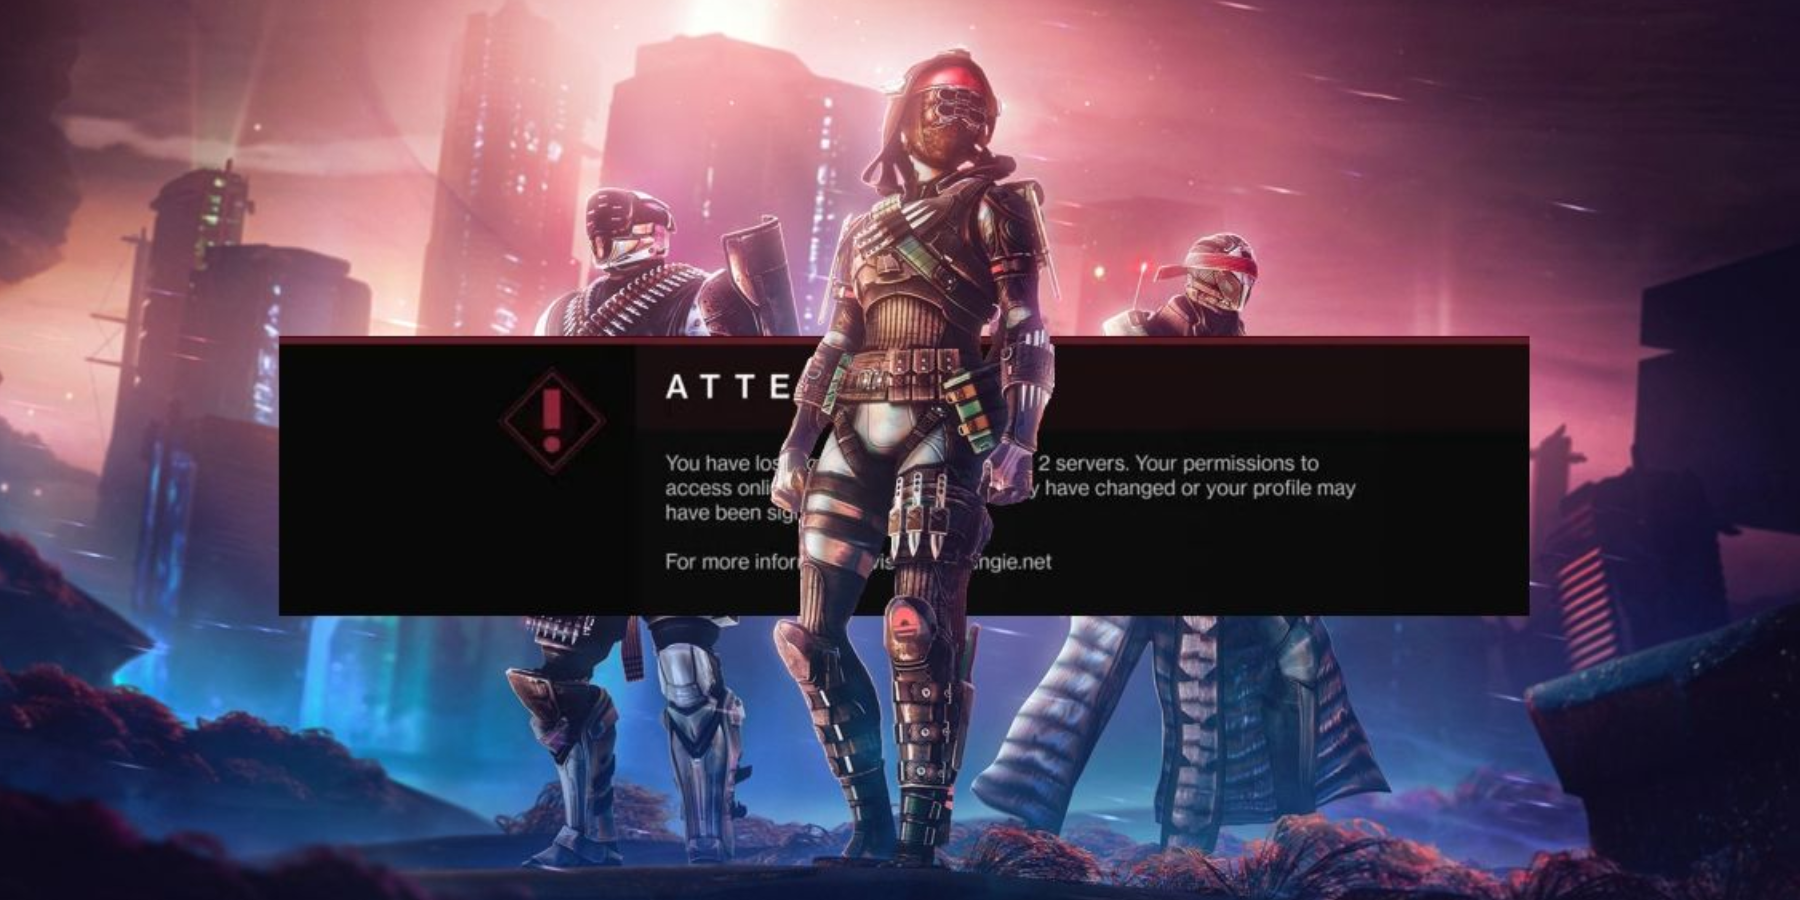 Destiny 2 Lightfall promo image with network disconnection notification.